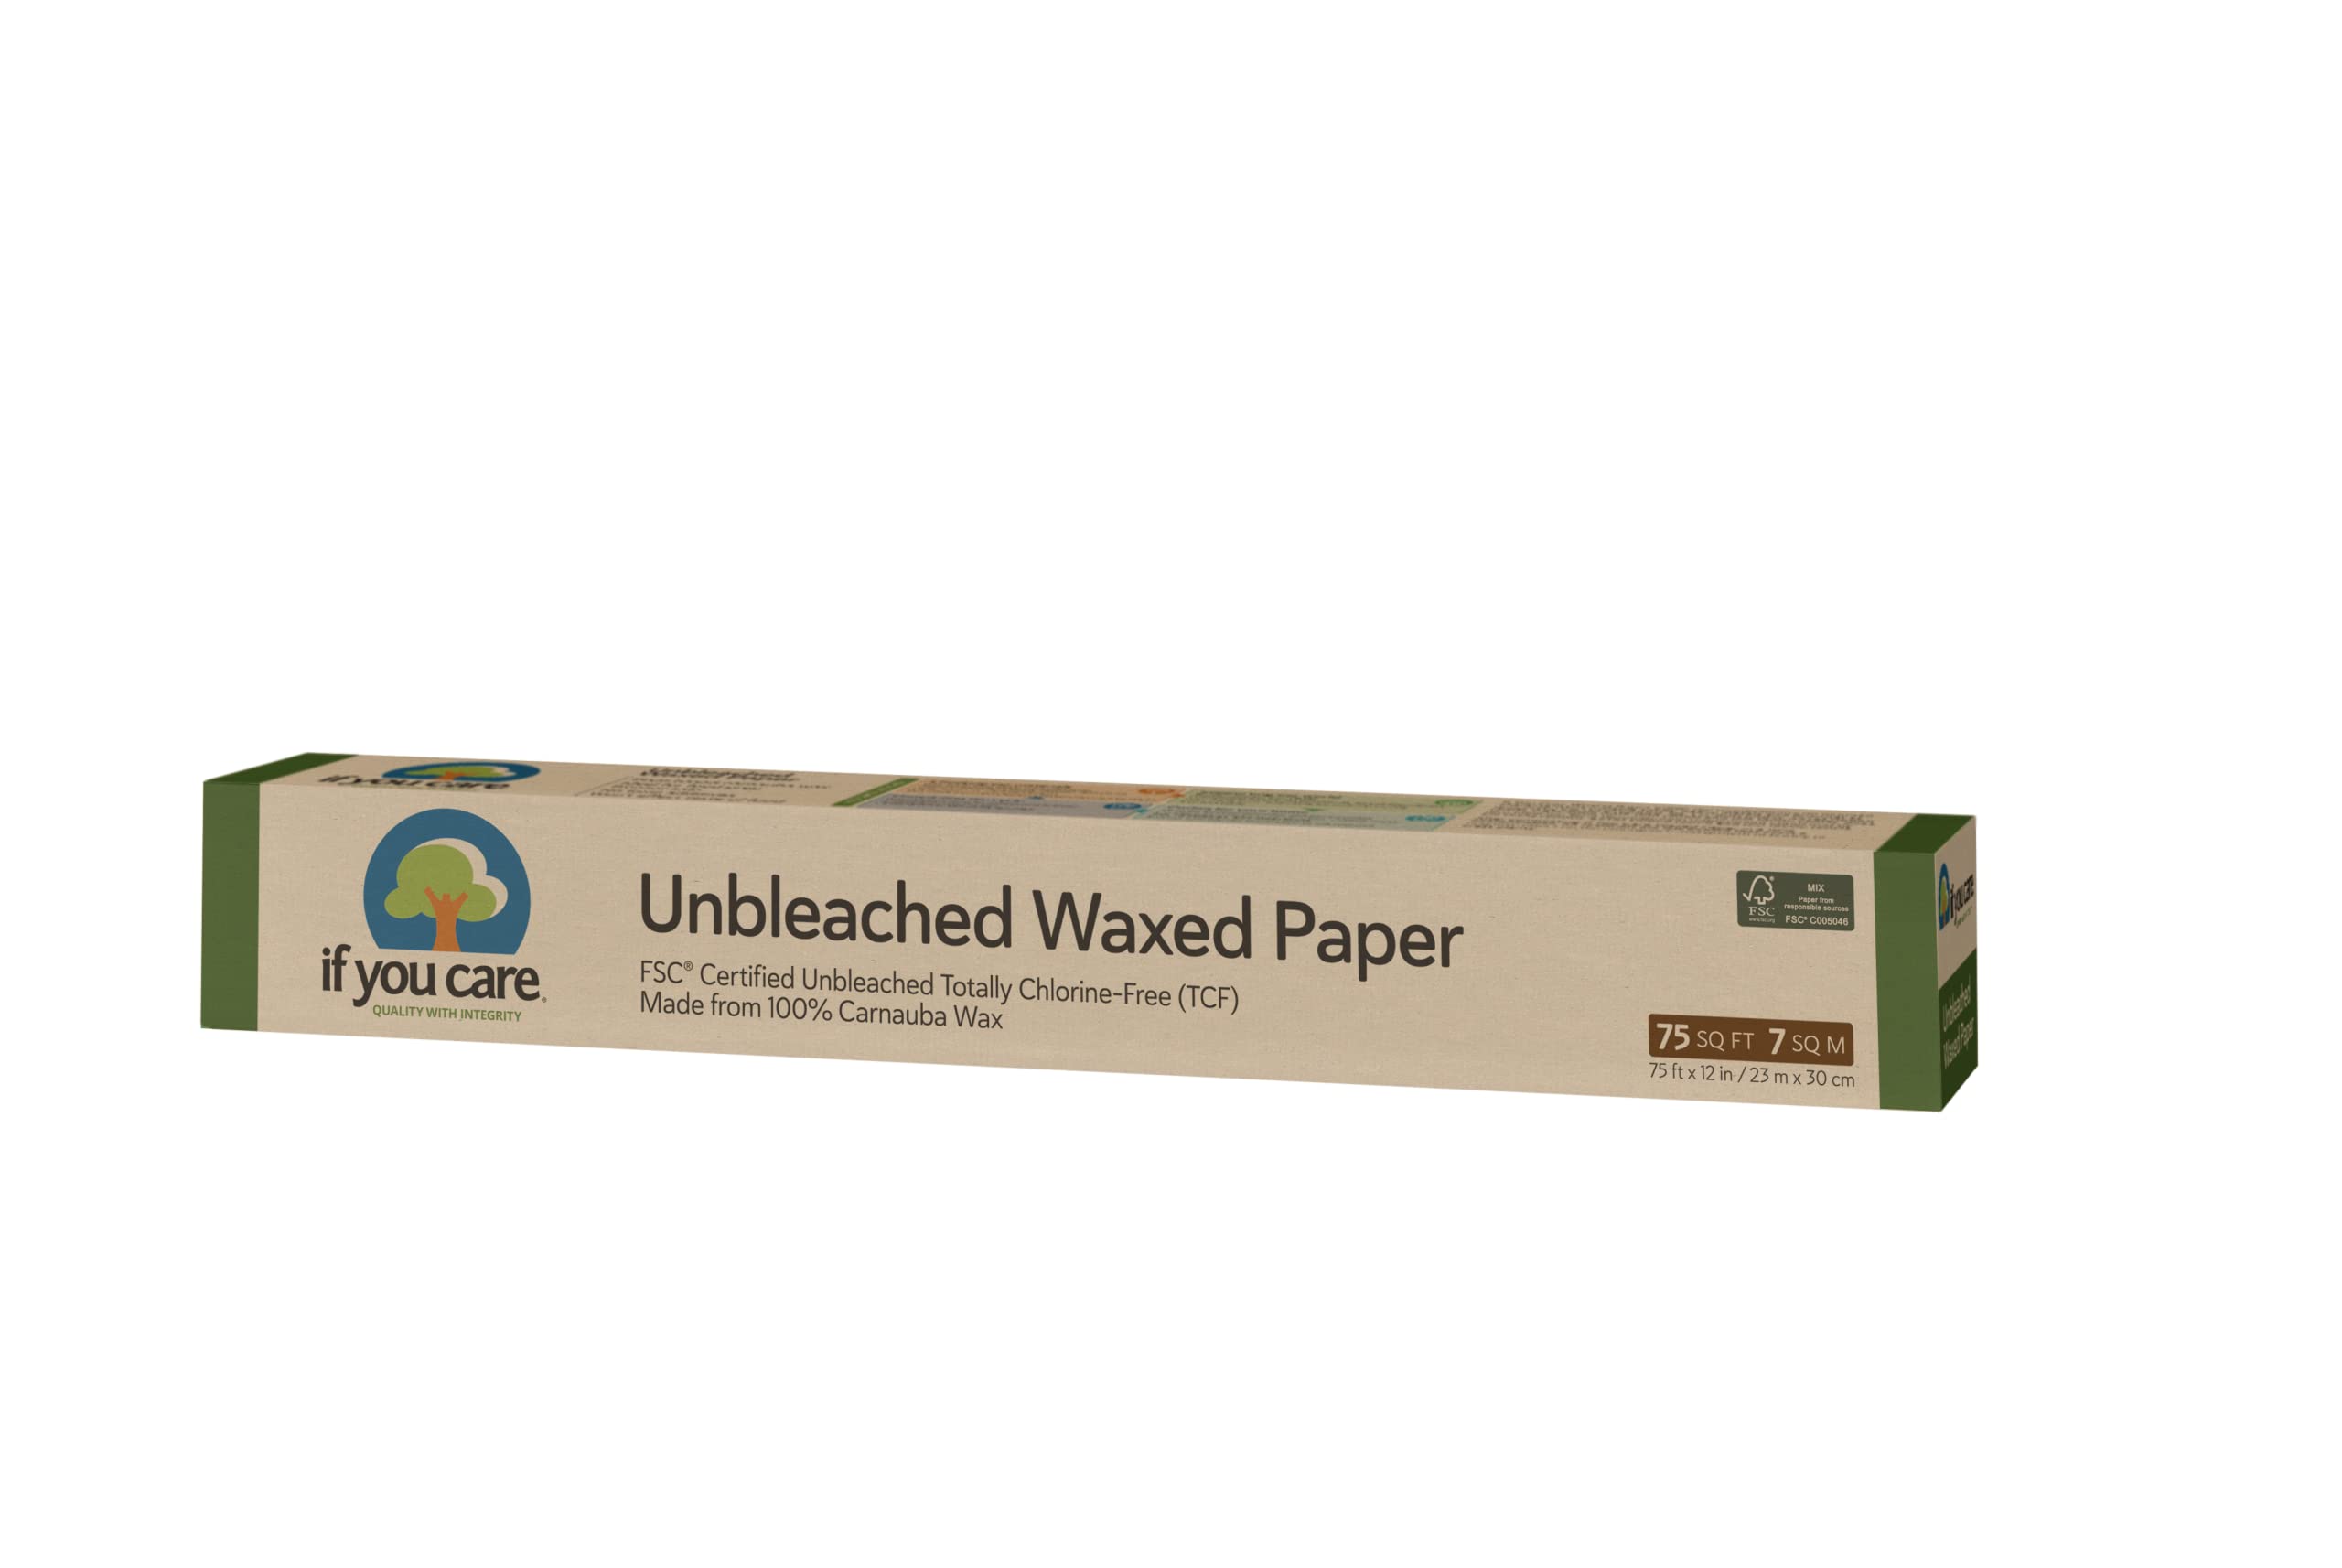 If You Care Wax Paper Rolls – 12 Pack of 75 Sq Ft Rolls - Unbleached, Chlorine Free, 100% Natural Soybean Coated Waxed Sheets, Liner for Baking, Cooking, Food Wrapping